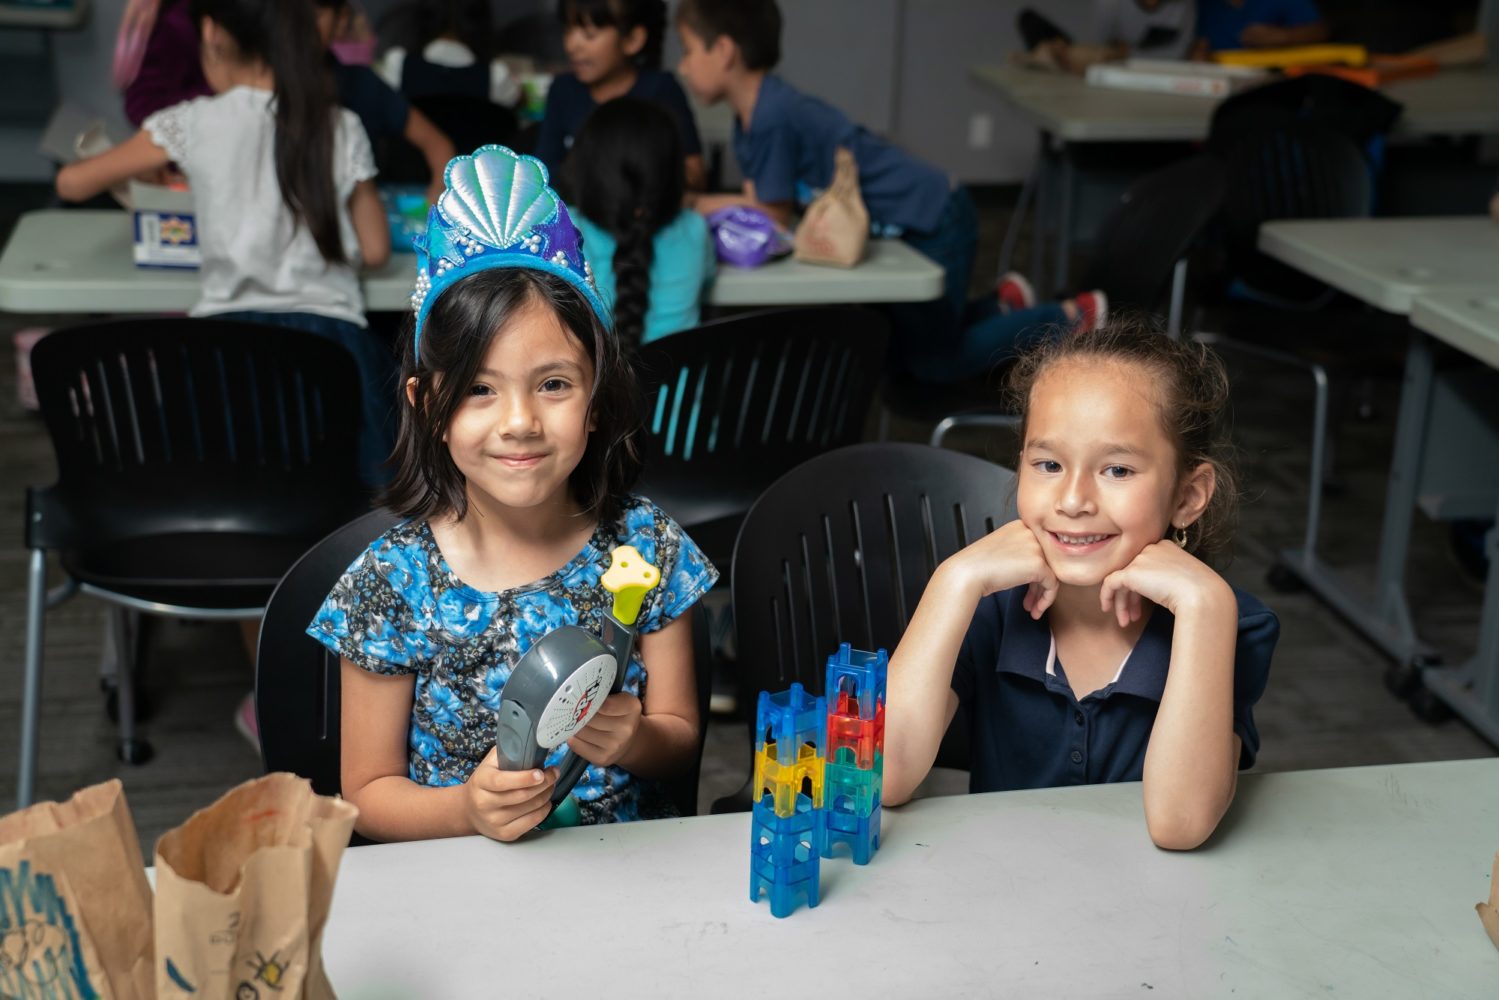 Two girls doing an activity and smiling at the camera